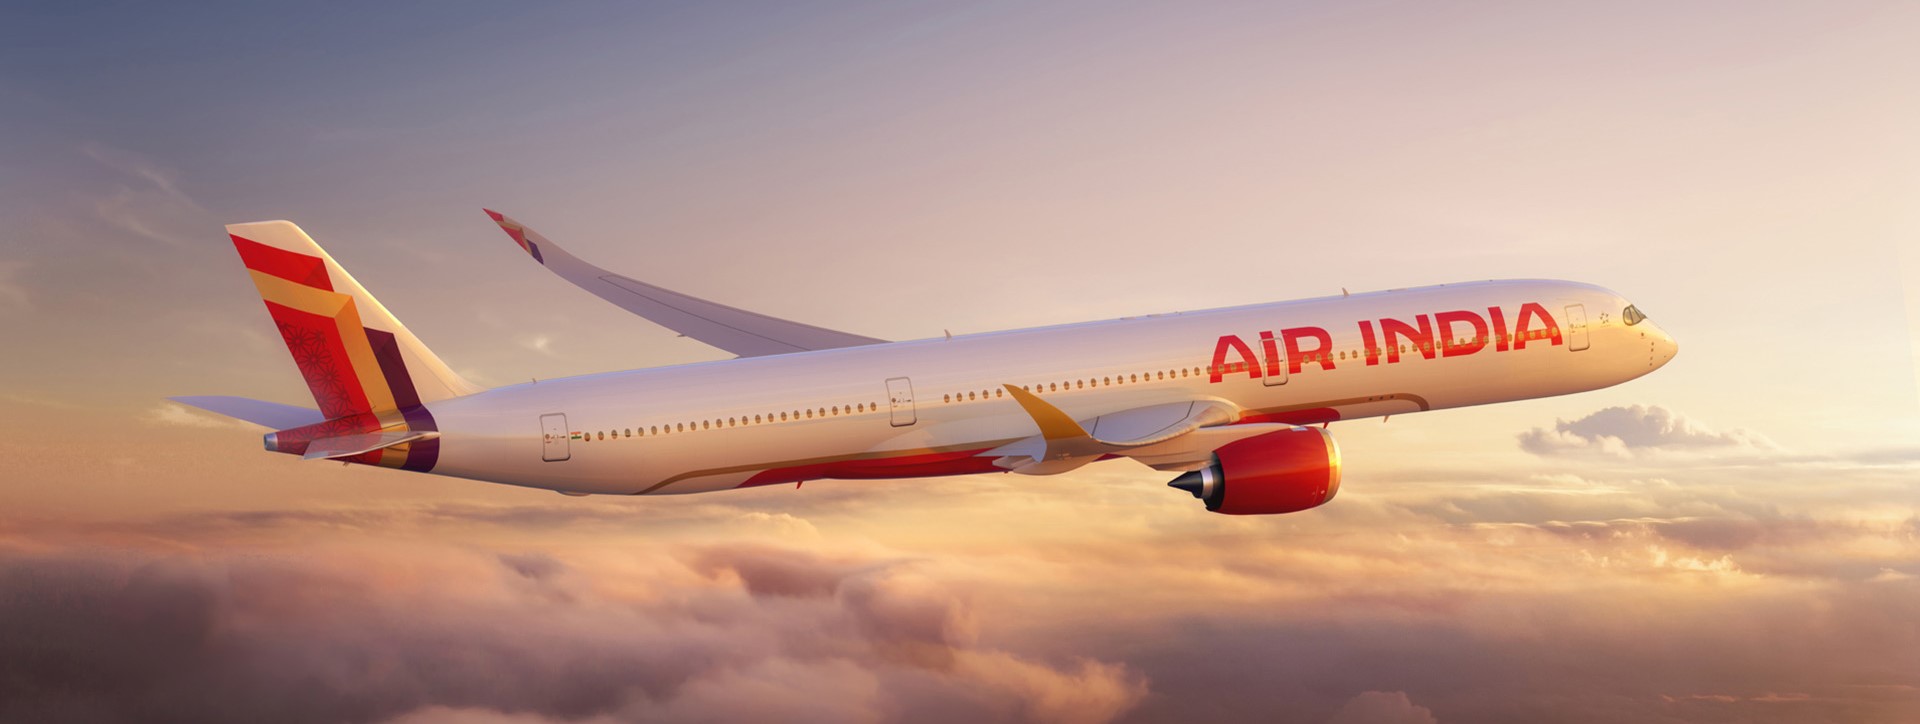 Air India is set to launch flights to Kuala Lumpur, Malaysia, beginning on September 15th.